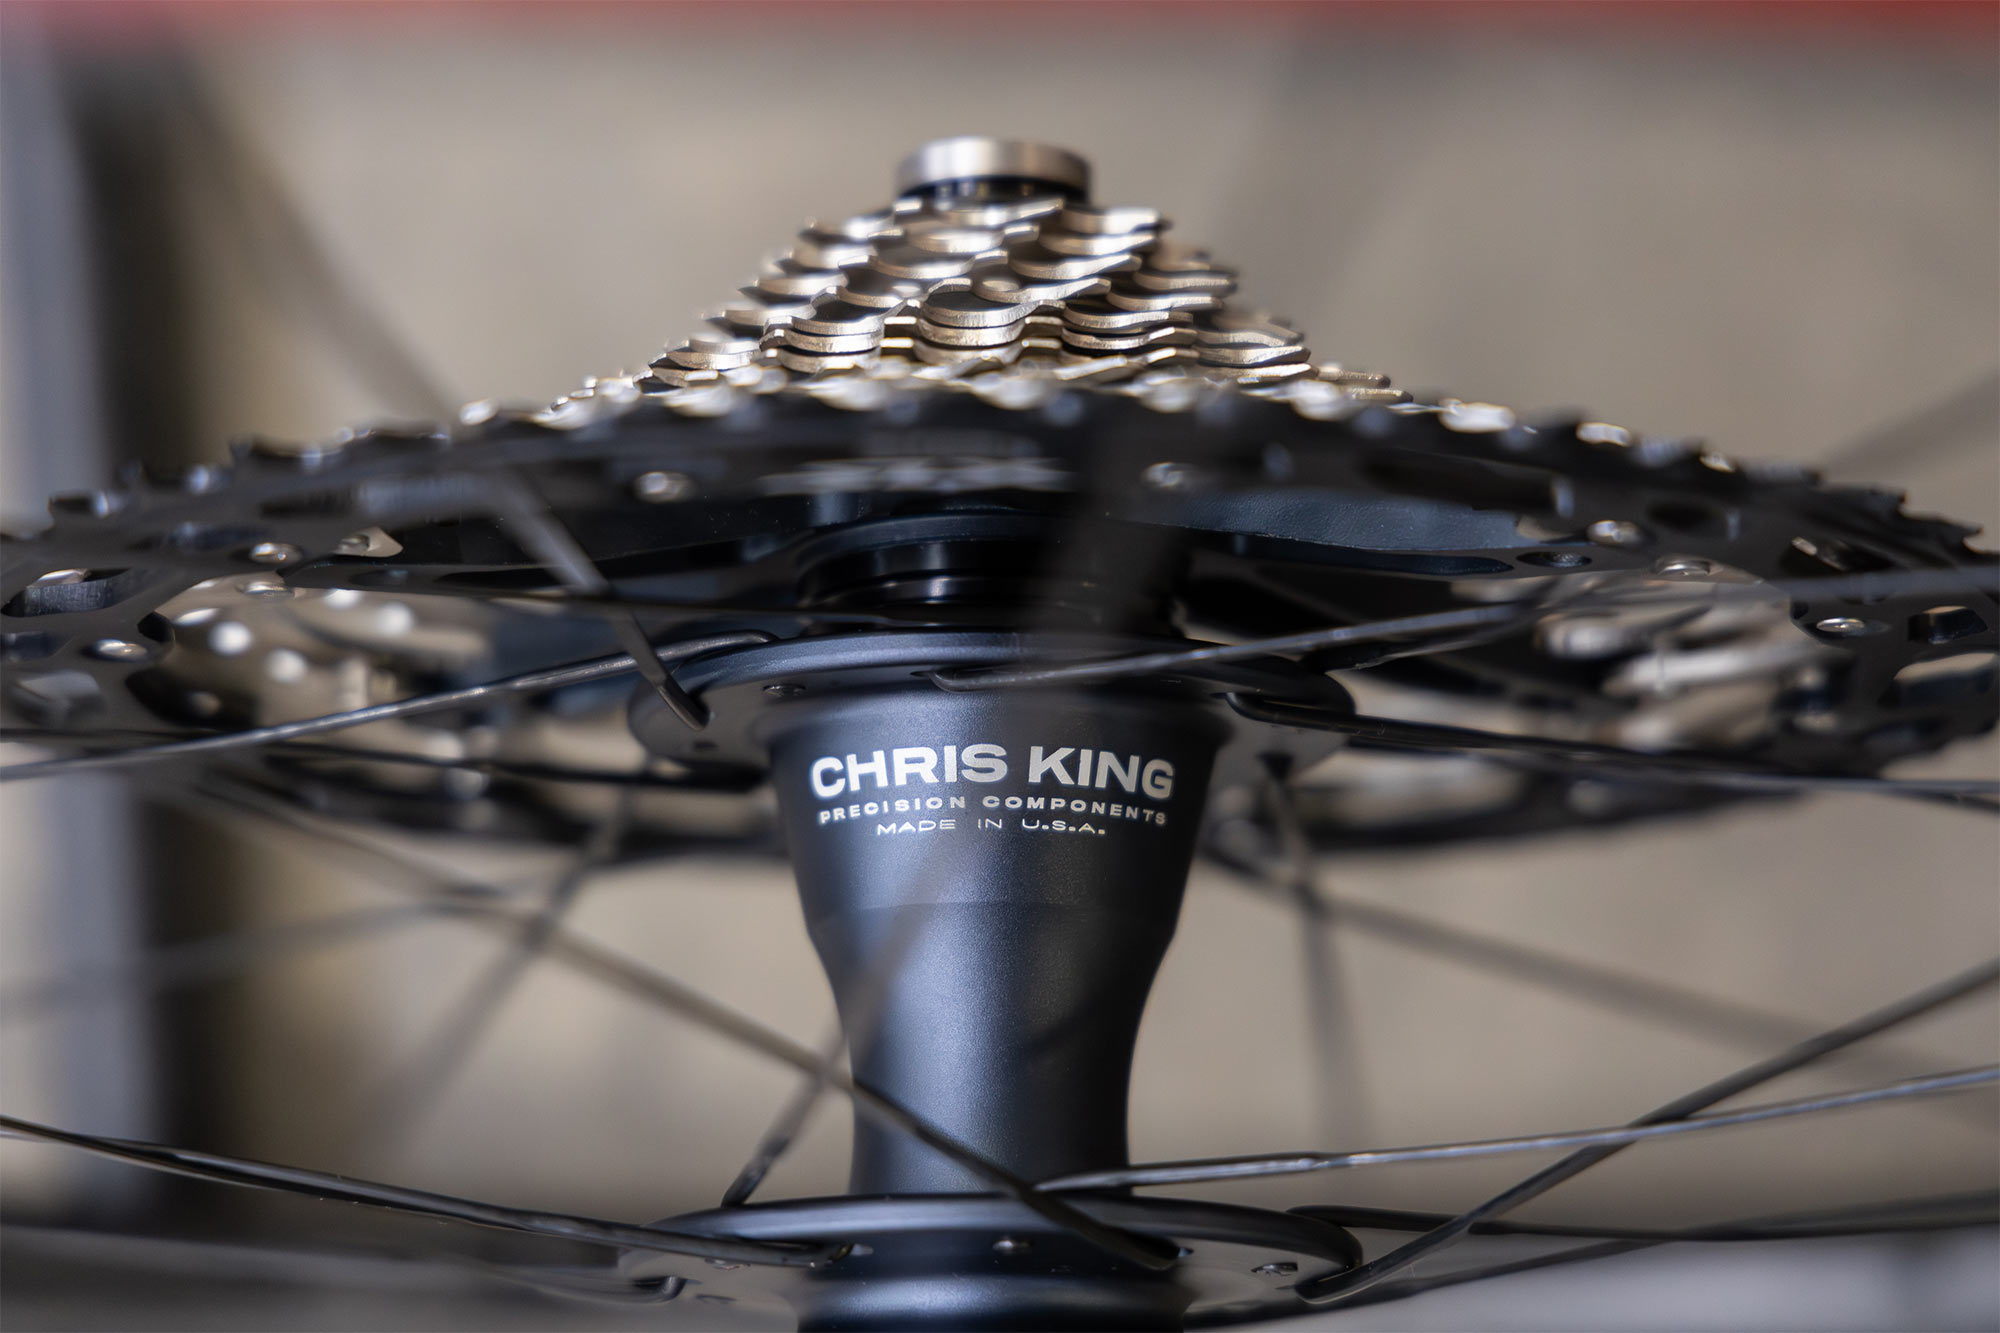 chris king micro spline freehub body shown with cassette attached